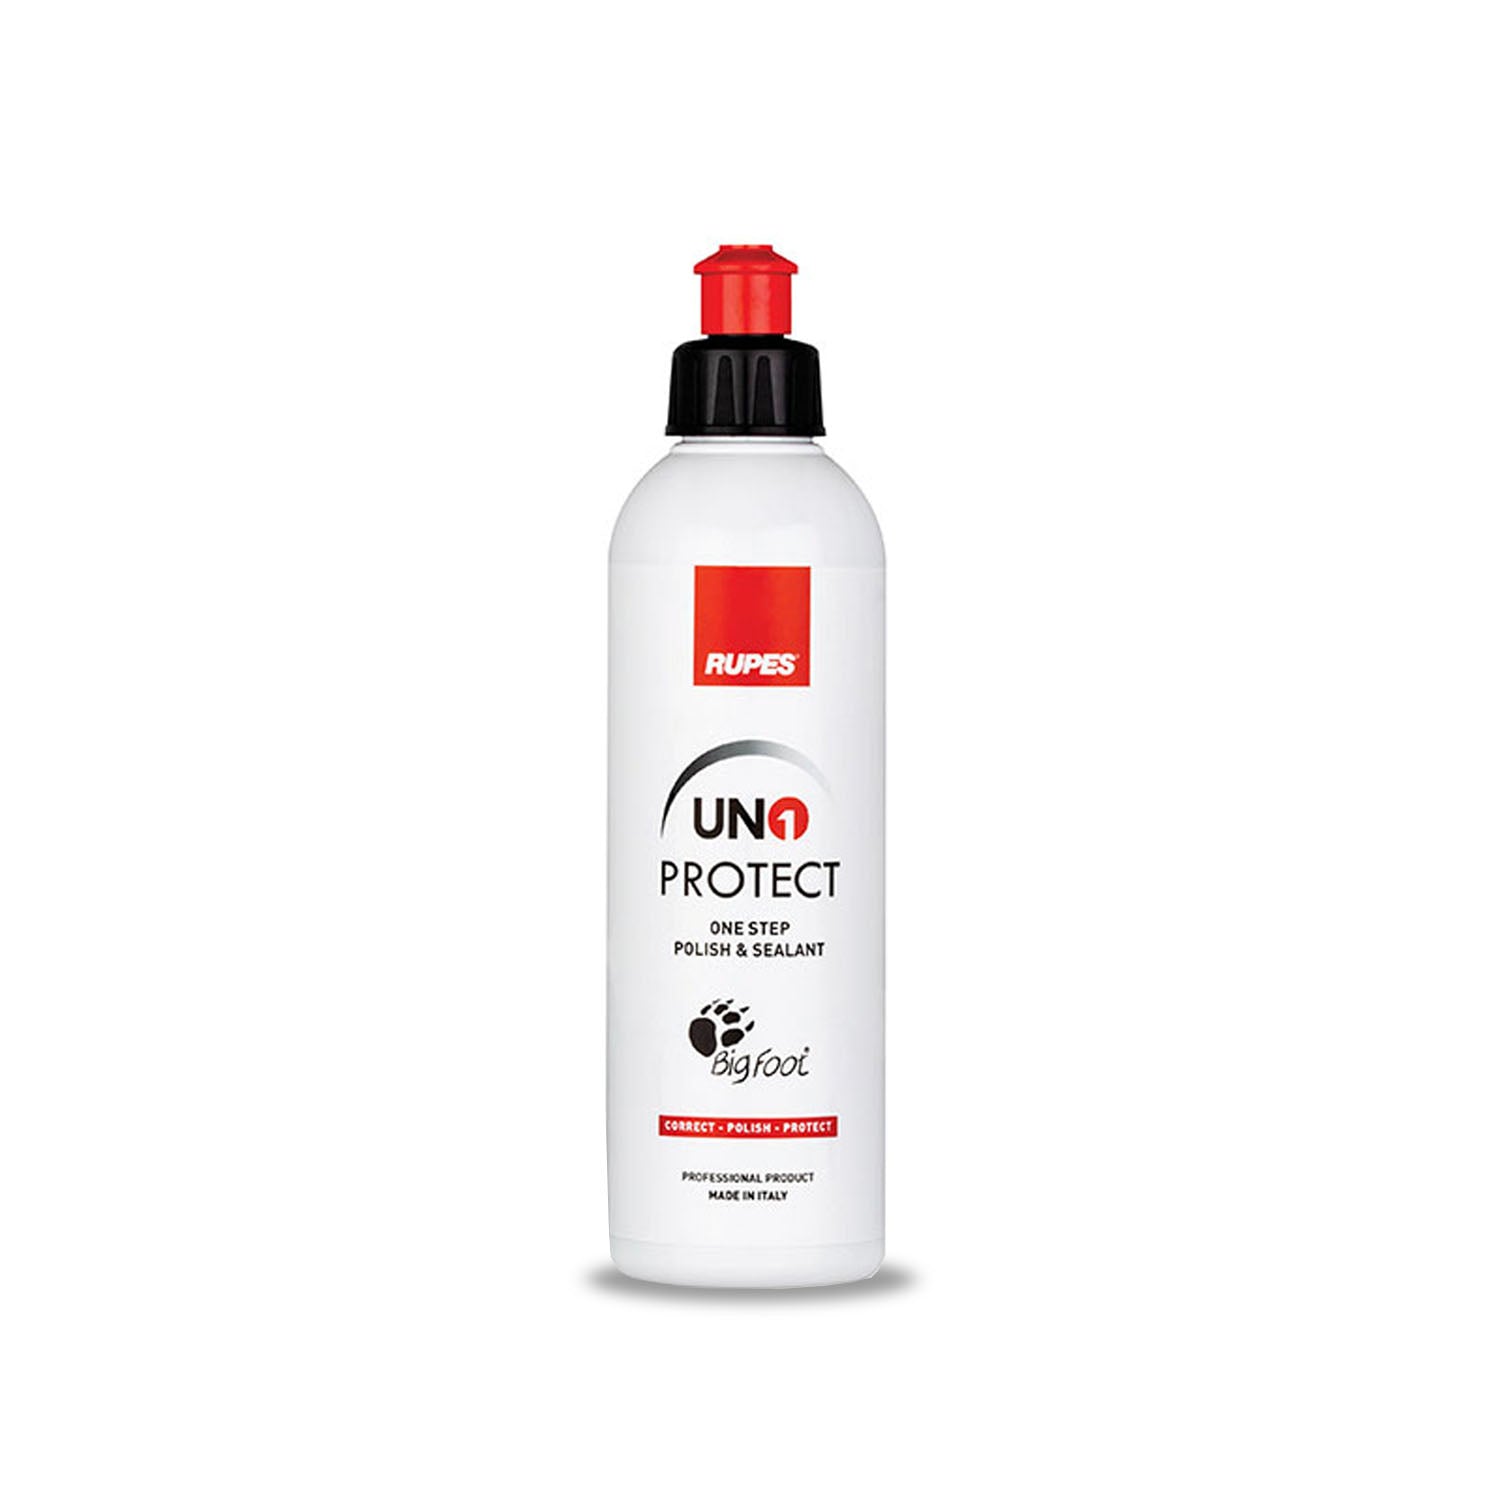 rupes-uno-protect-one-step-sealant-1000-ml